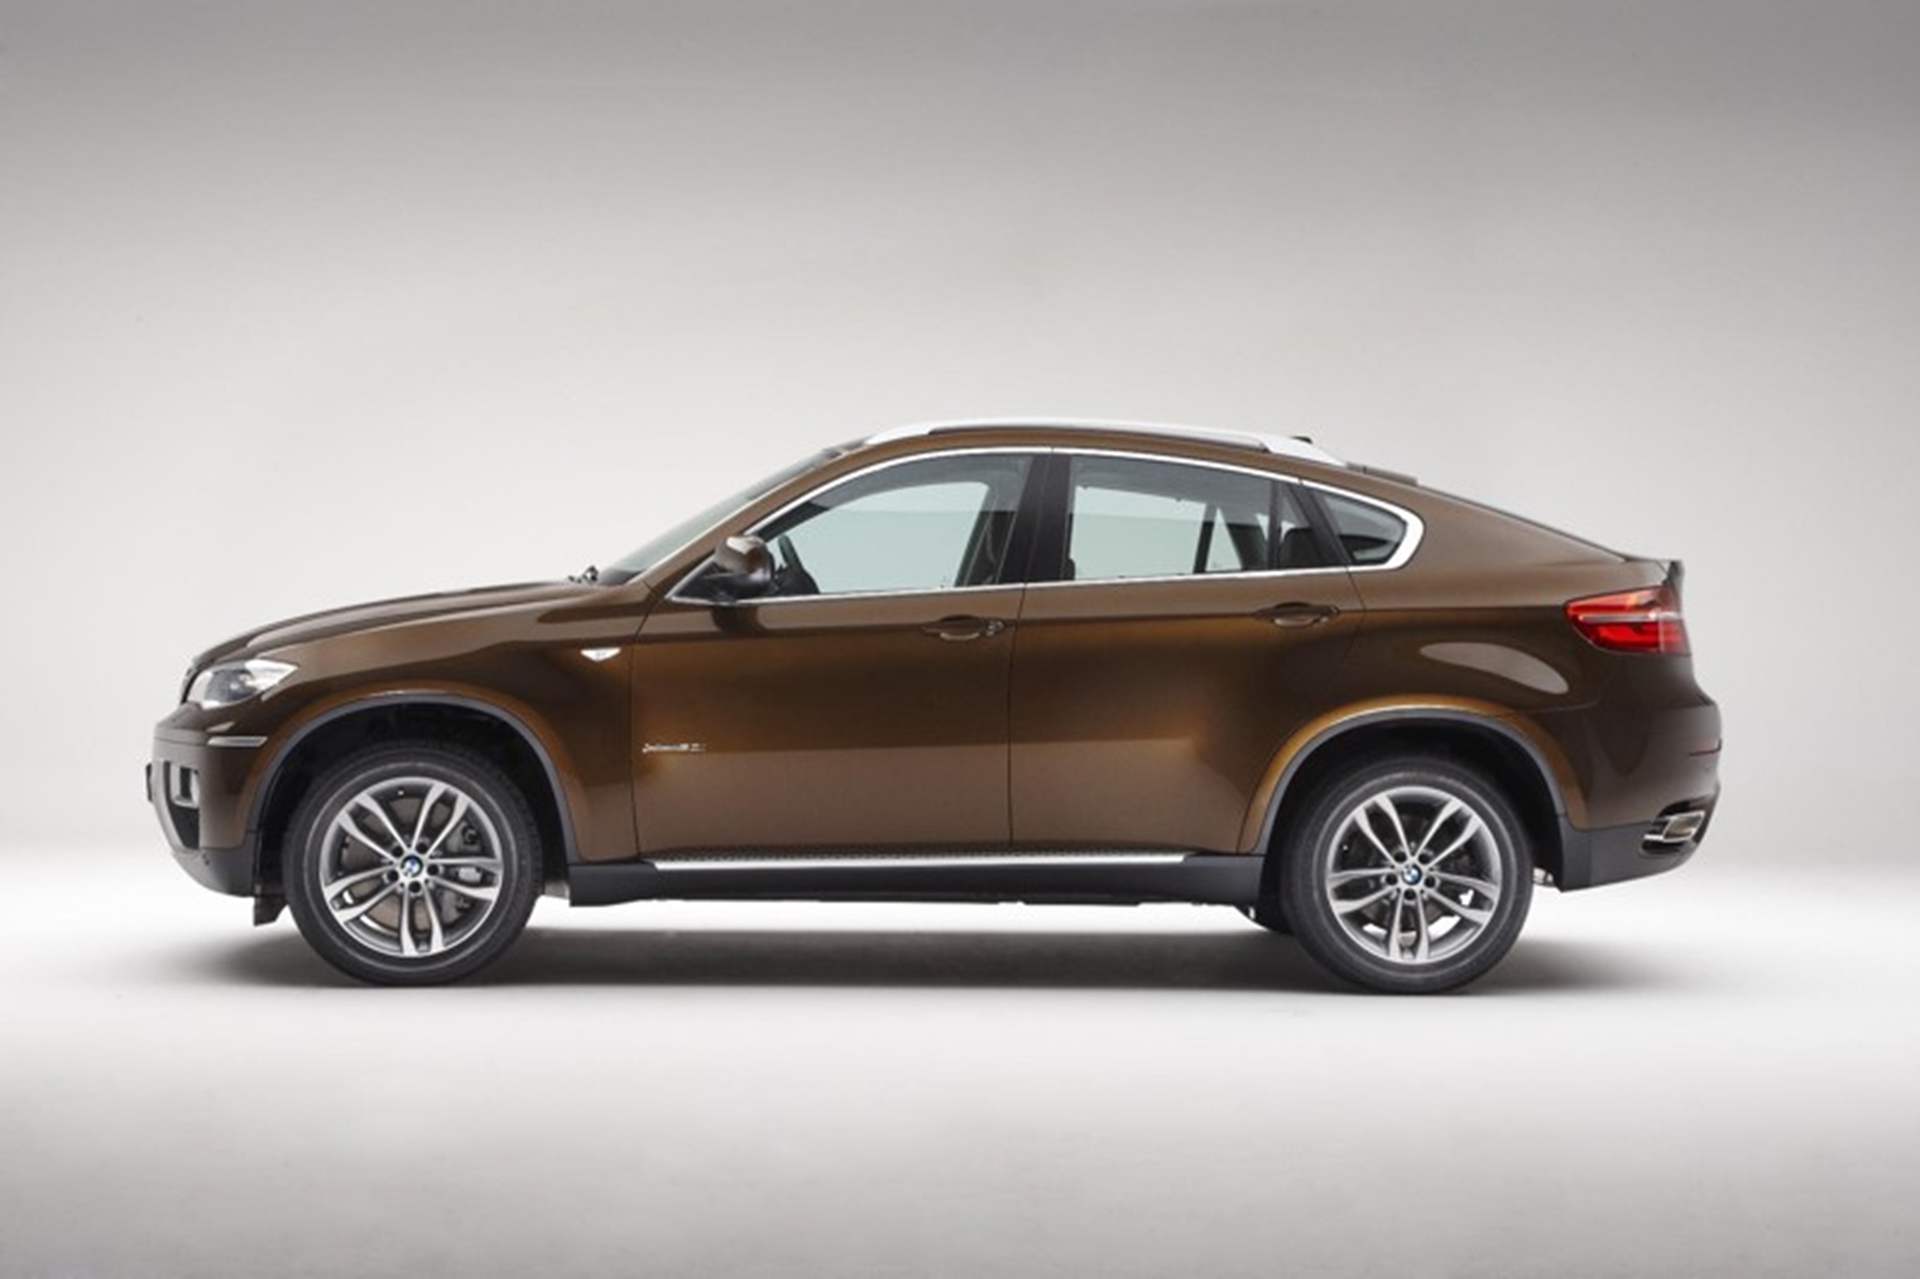 UNIQUE – AND NOW MORE EXCEPTIONAL THAN EVER: THE NEW BMW X6